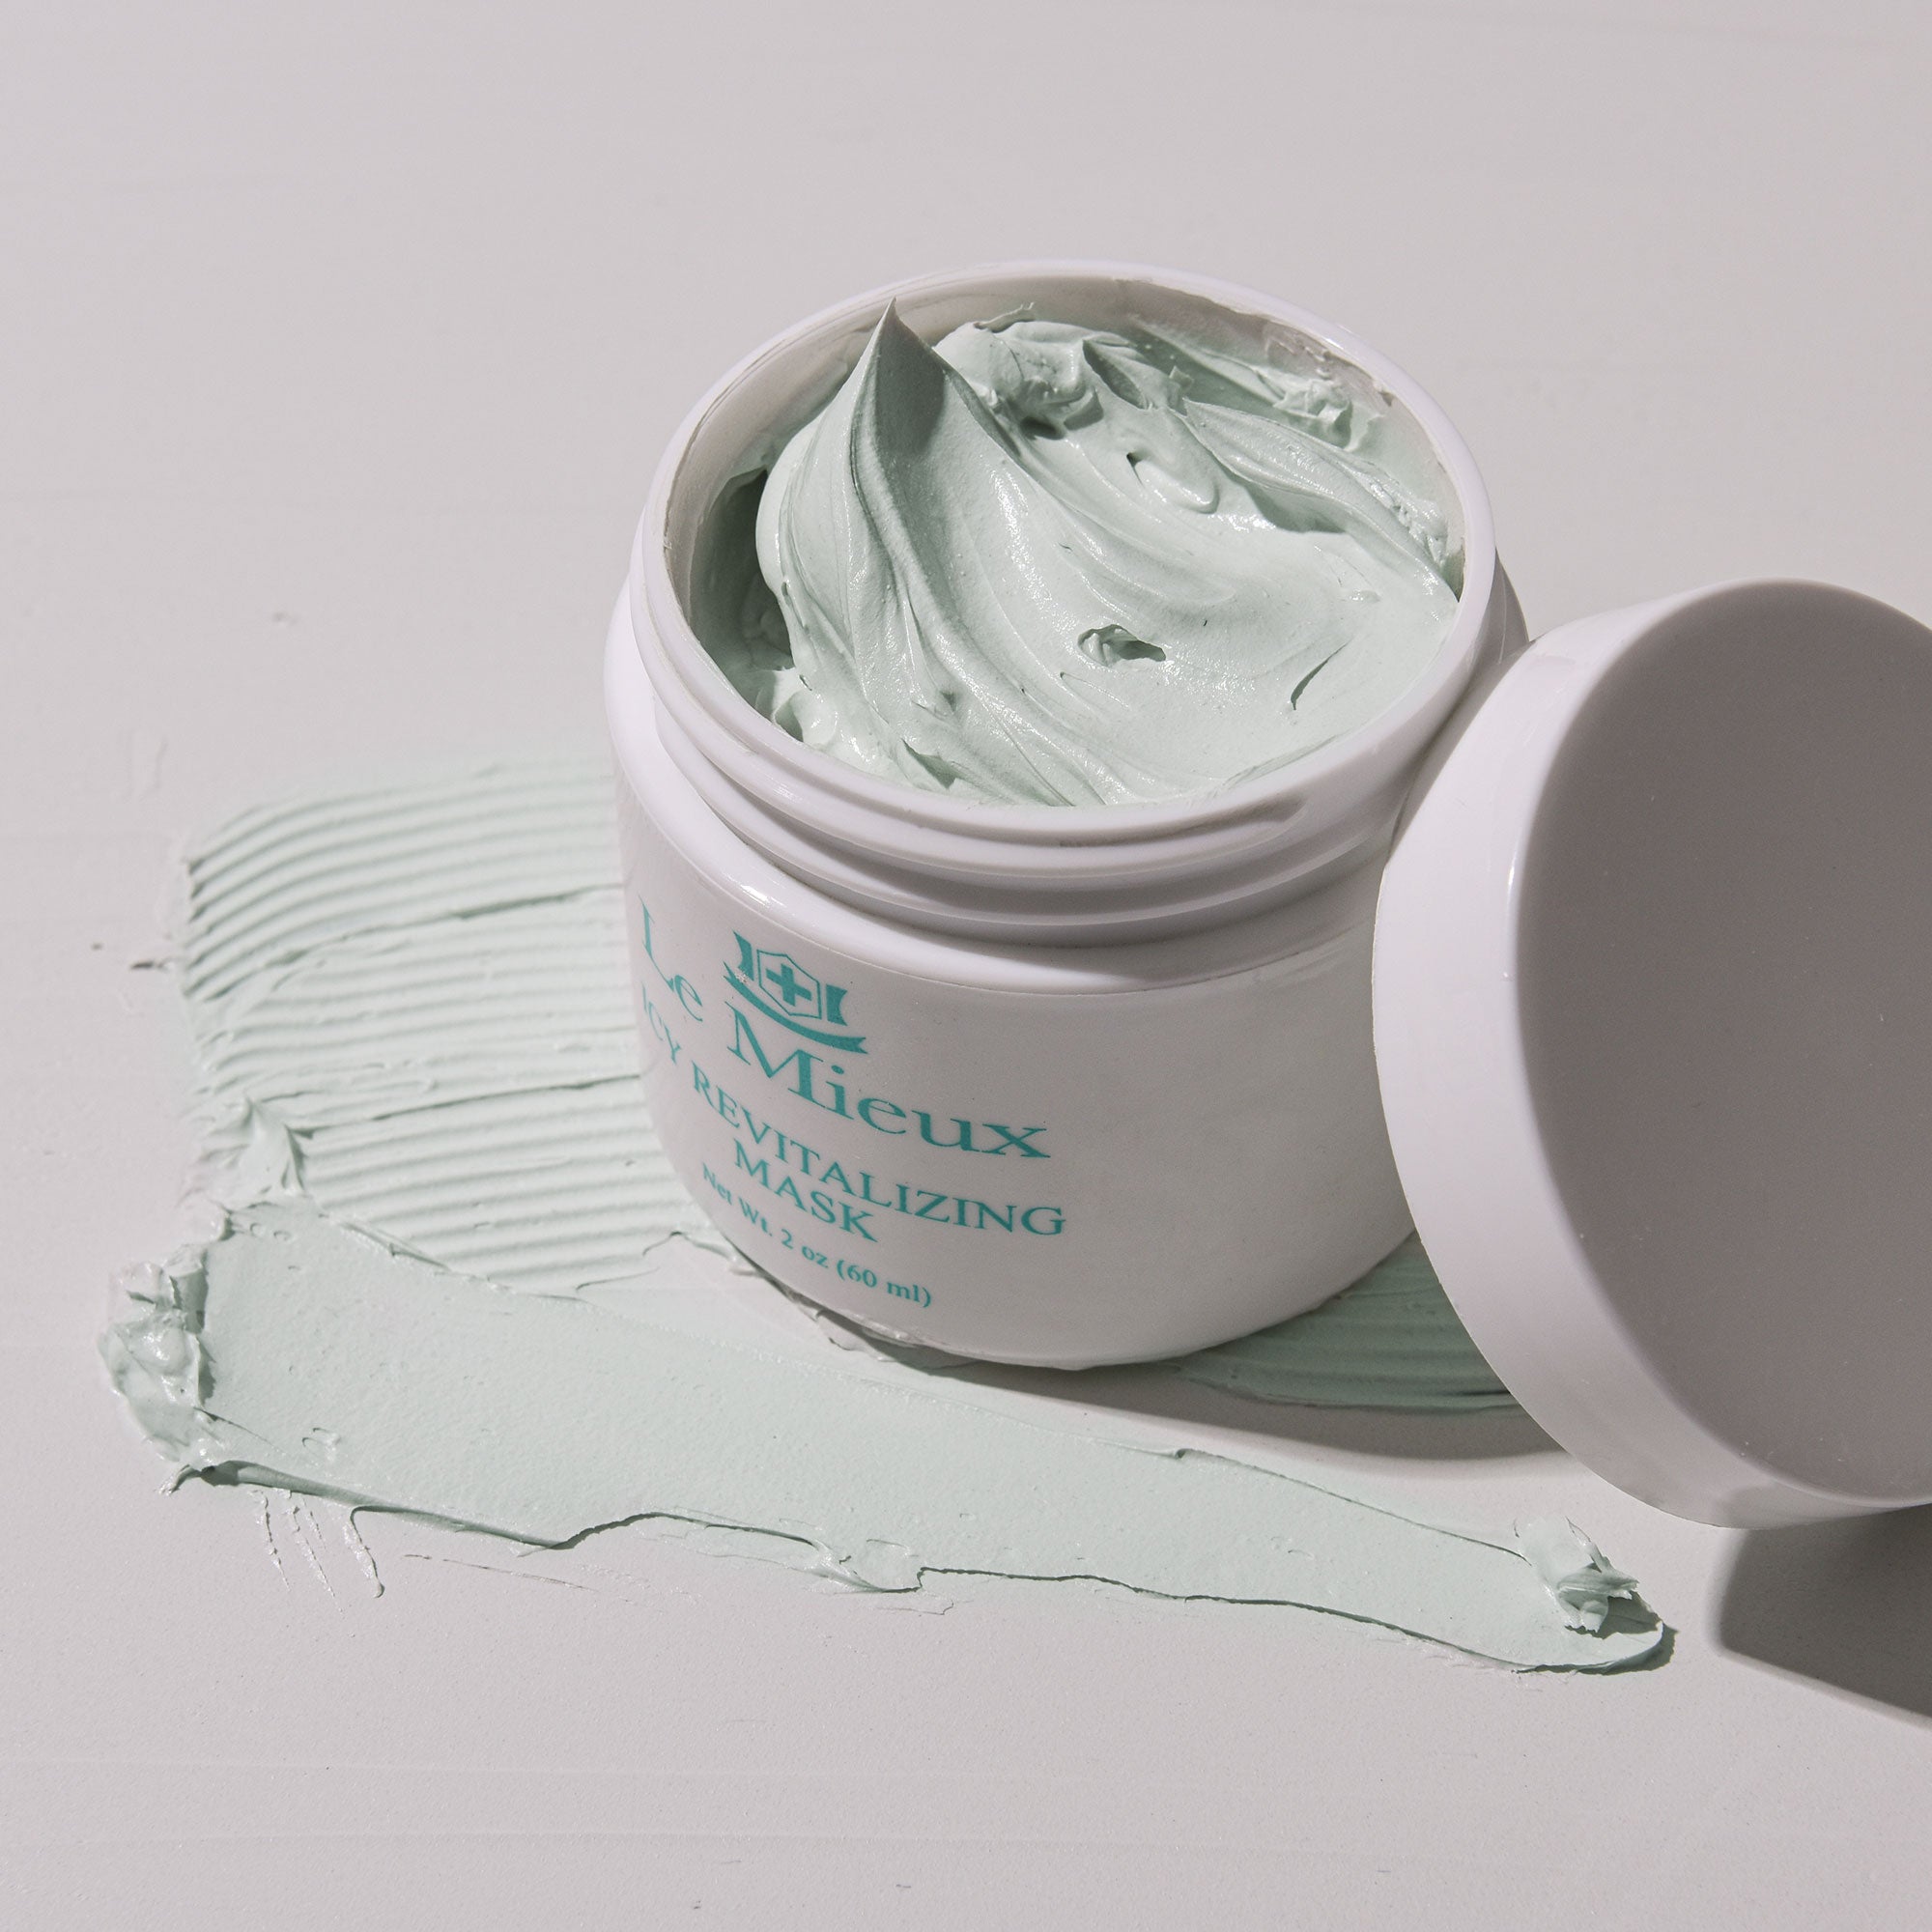  ICY REVITALIZING MASK from Le Mieux Skincare - 3